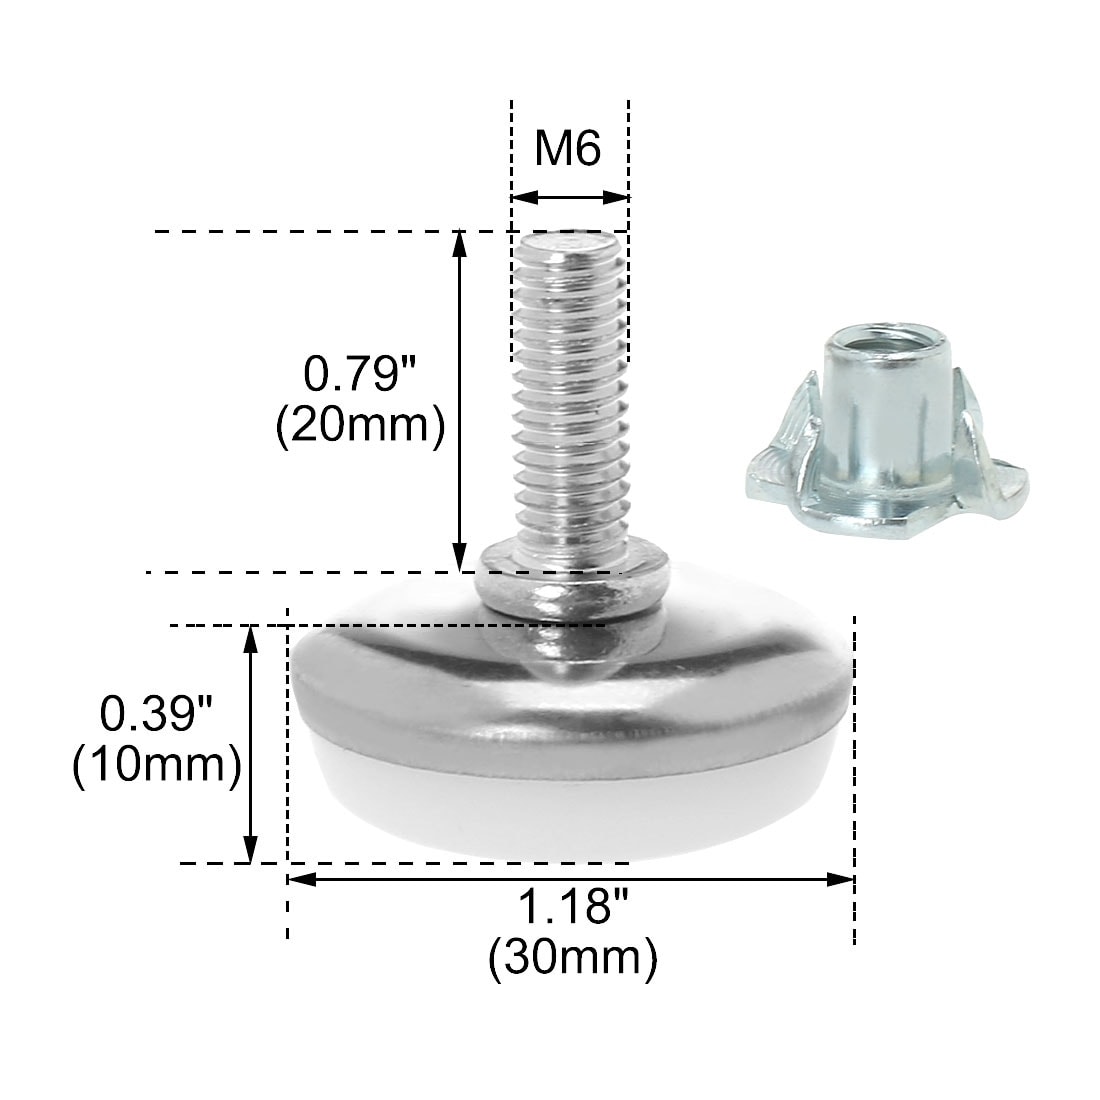 uxcell M10 x 20 x 30mm Screw on Furniture Glide Leveling Feet Floor Thread Stem Protector Adjustable Leveler with T-nuts for Chair Leg 8 Pack 